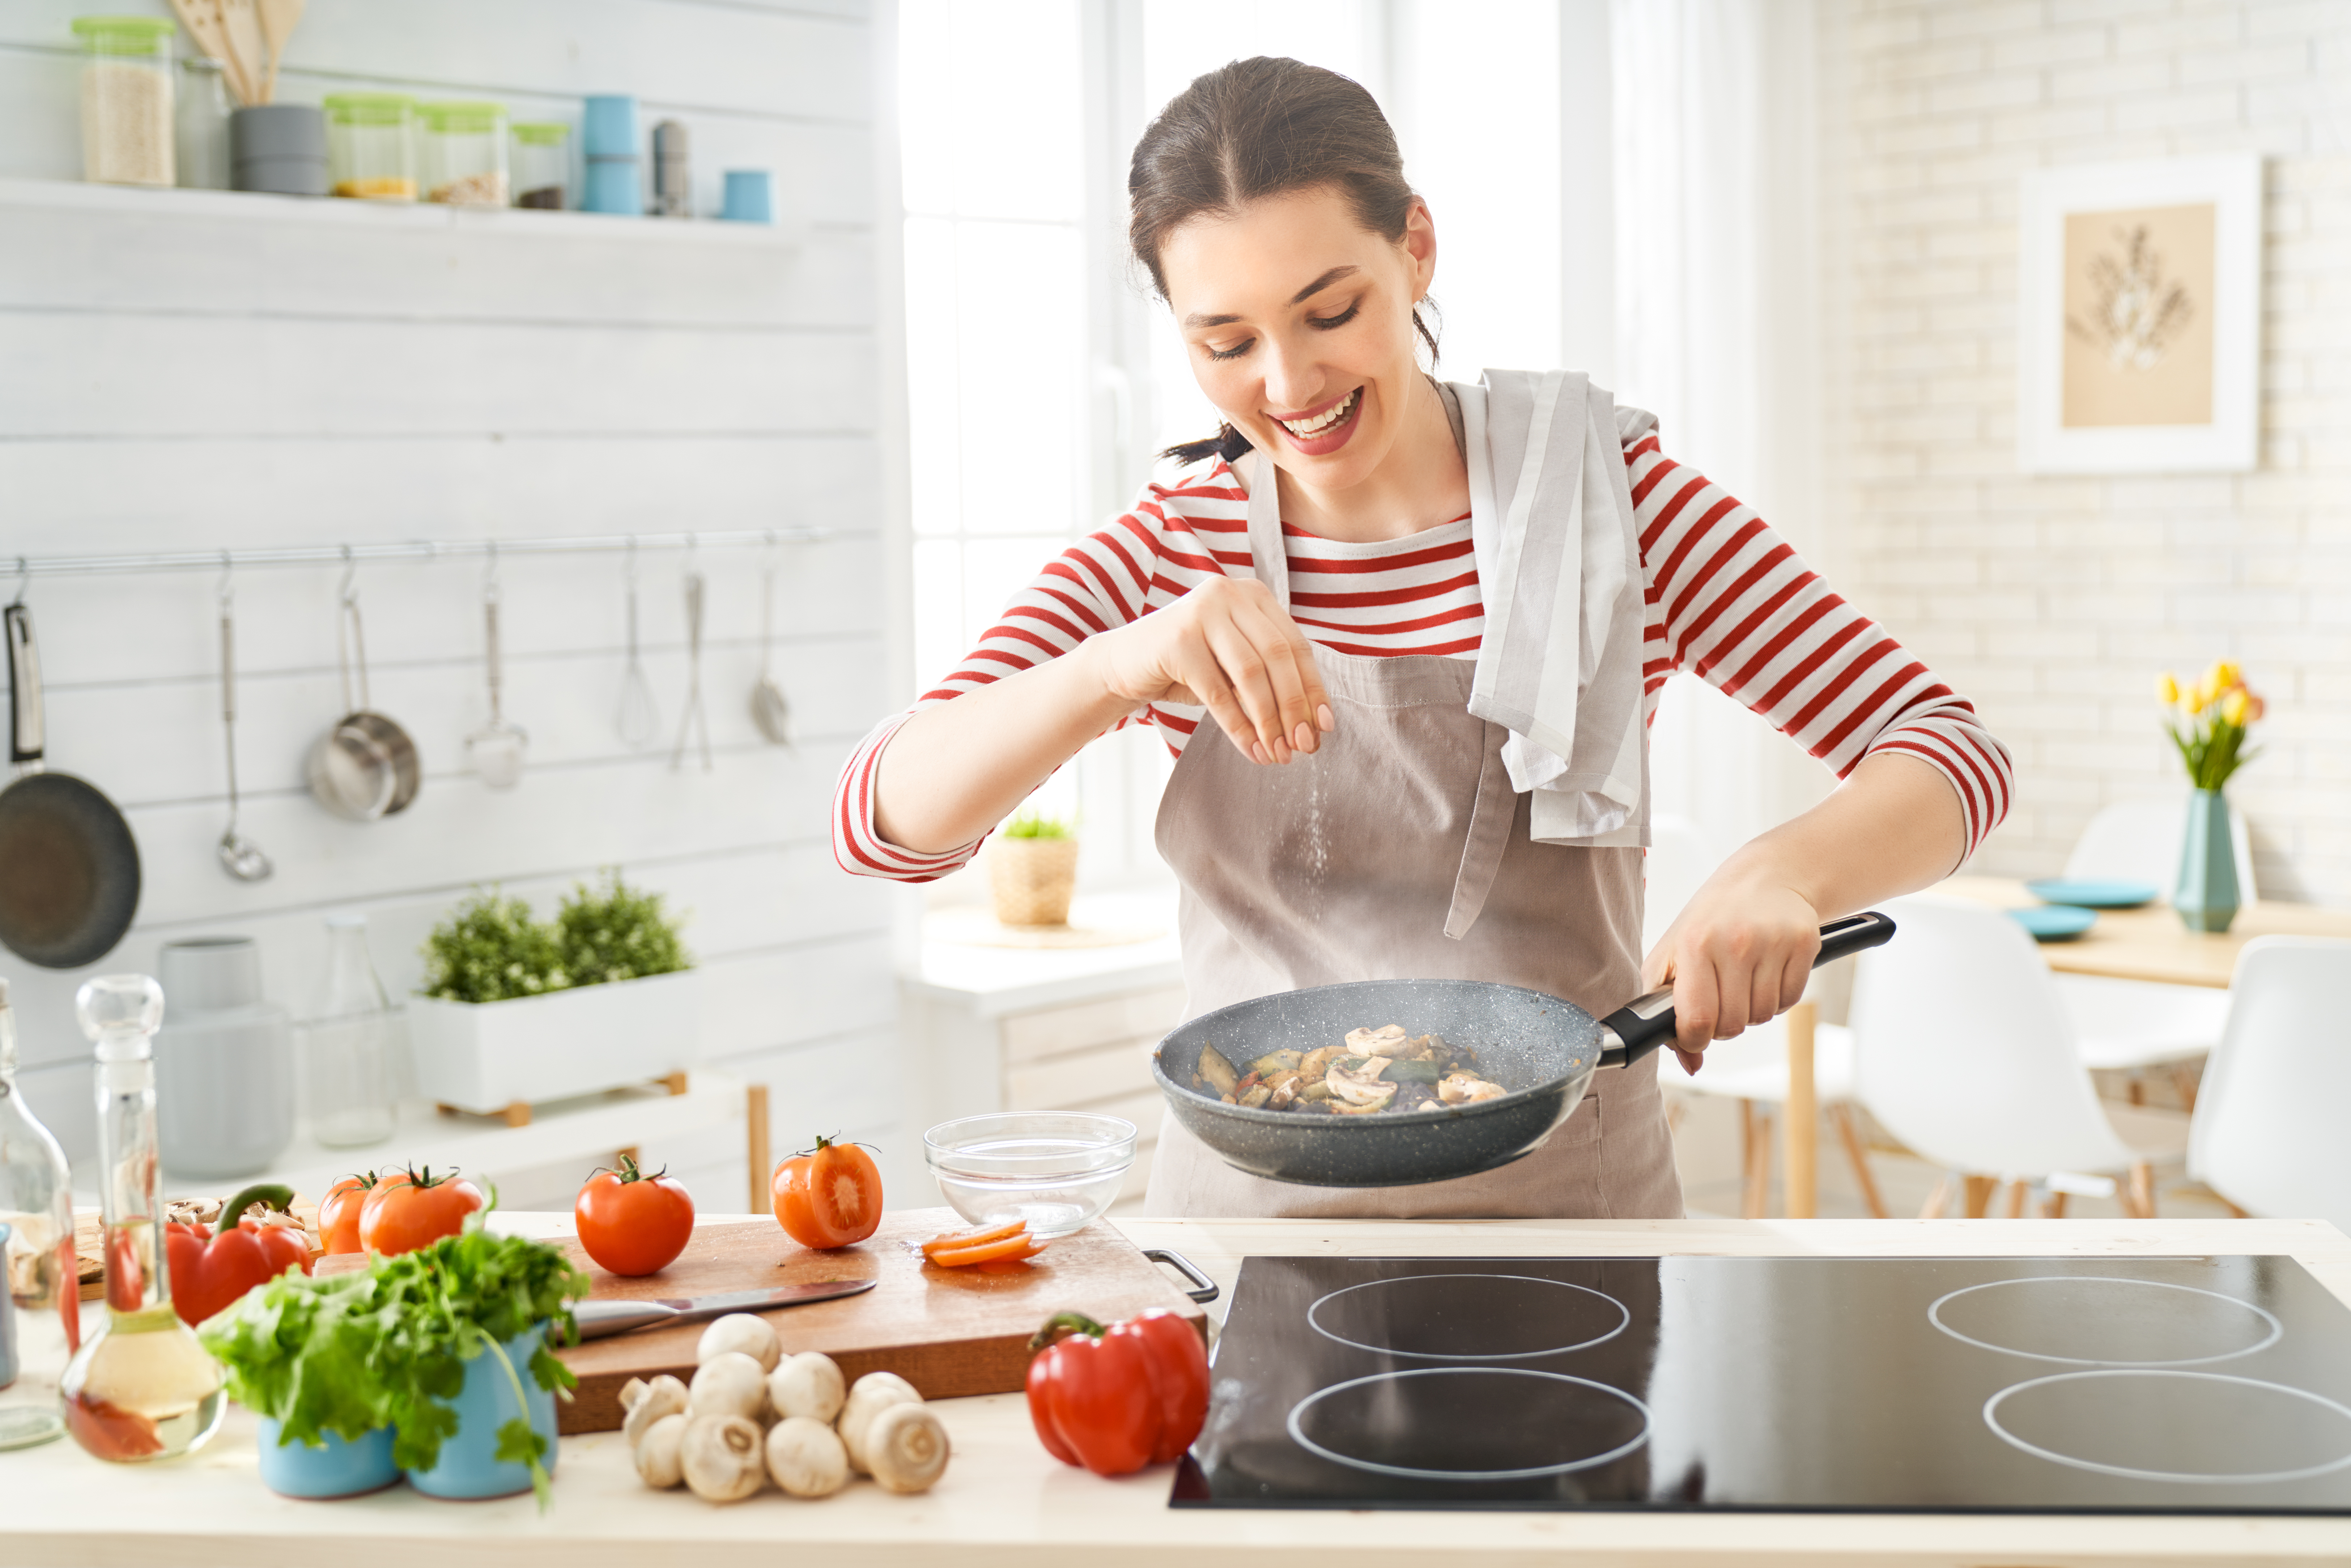 Happy woman is preparing the proper meal in the kitchen. | Source: Shutterstock